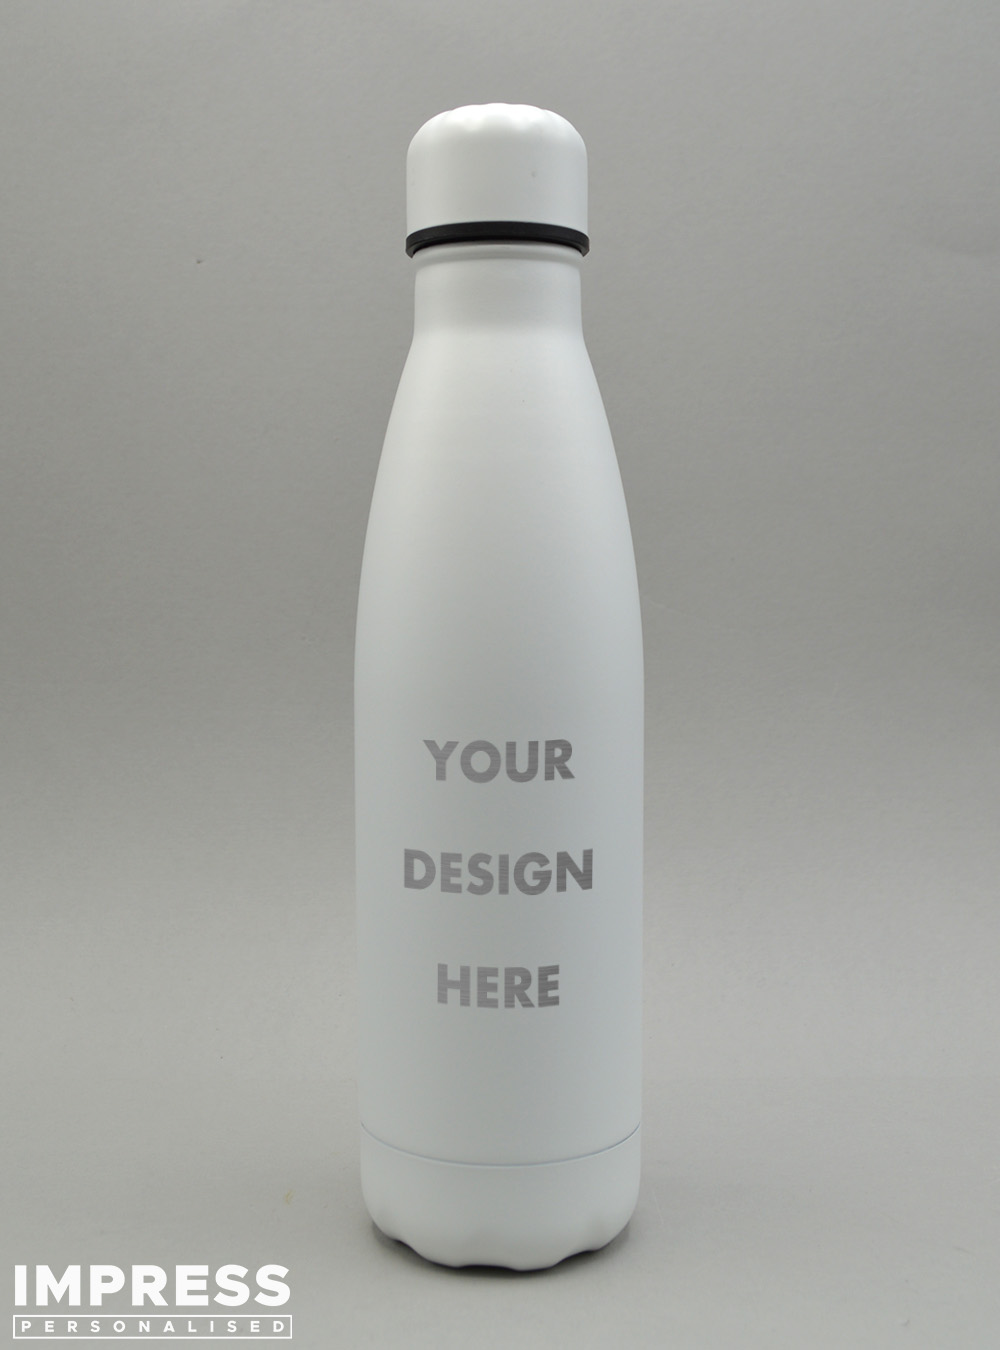 Design Your Own Stainless Steel Thermos